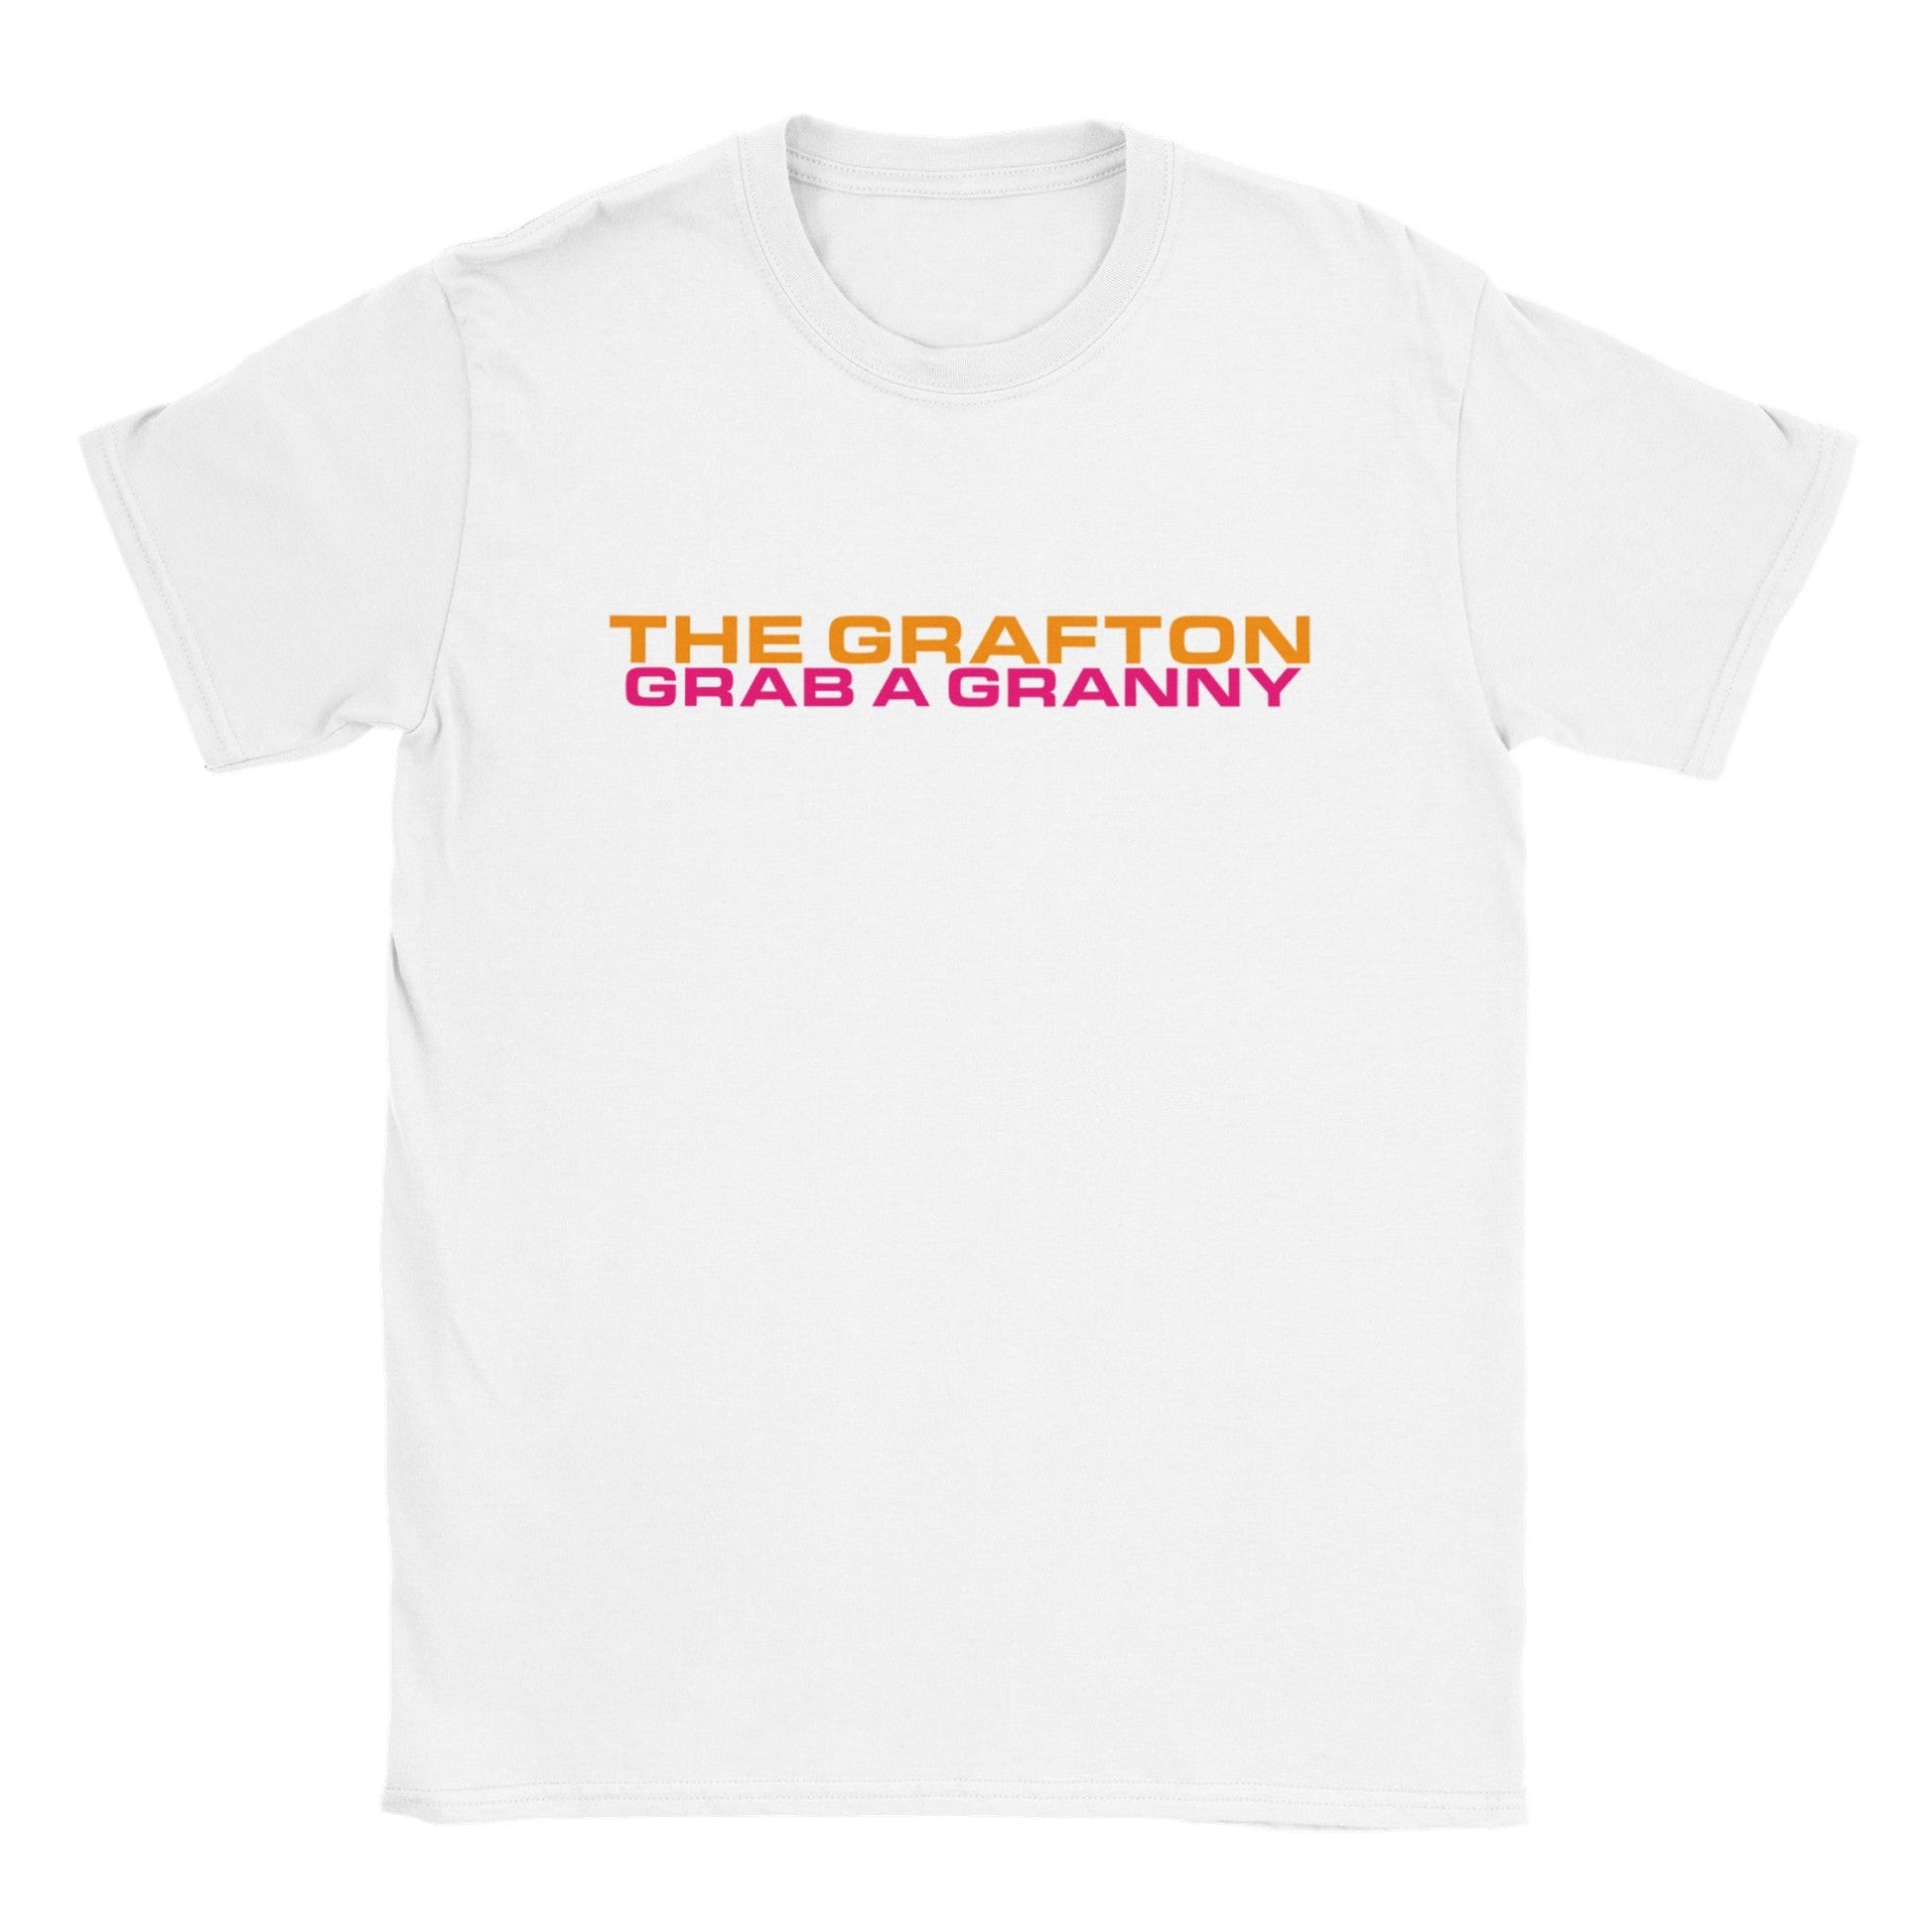 The Grafton - Grab A Granny - unisex fit T-shirt - various colours - Dirty Stop Outs